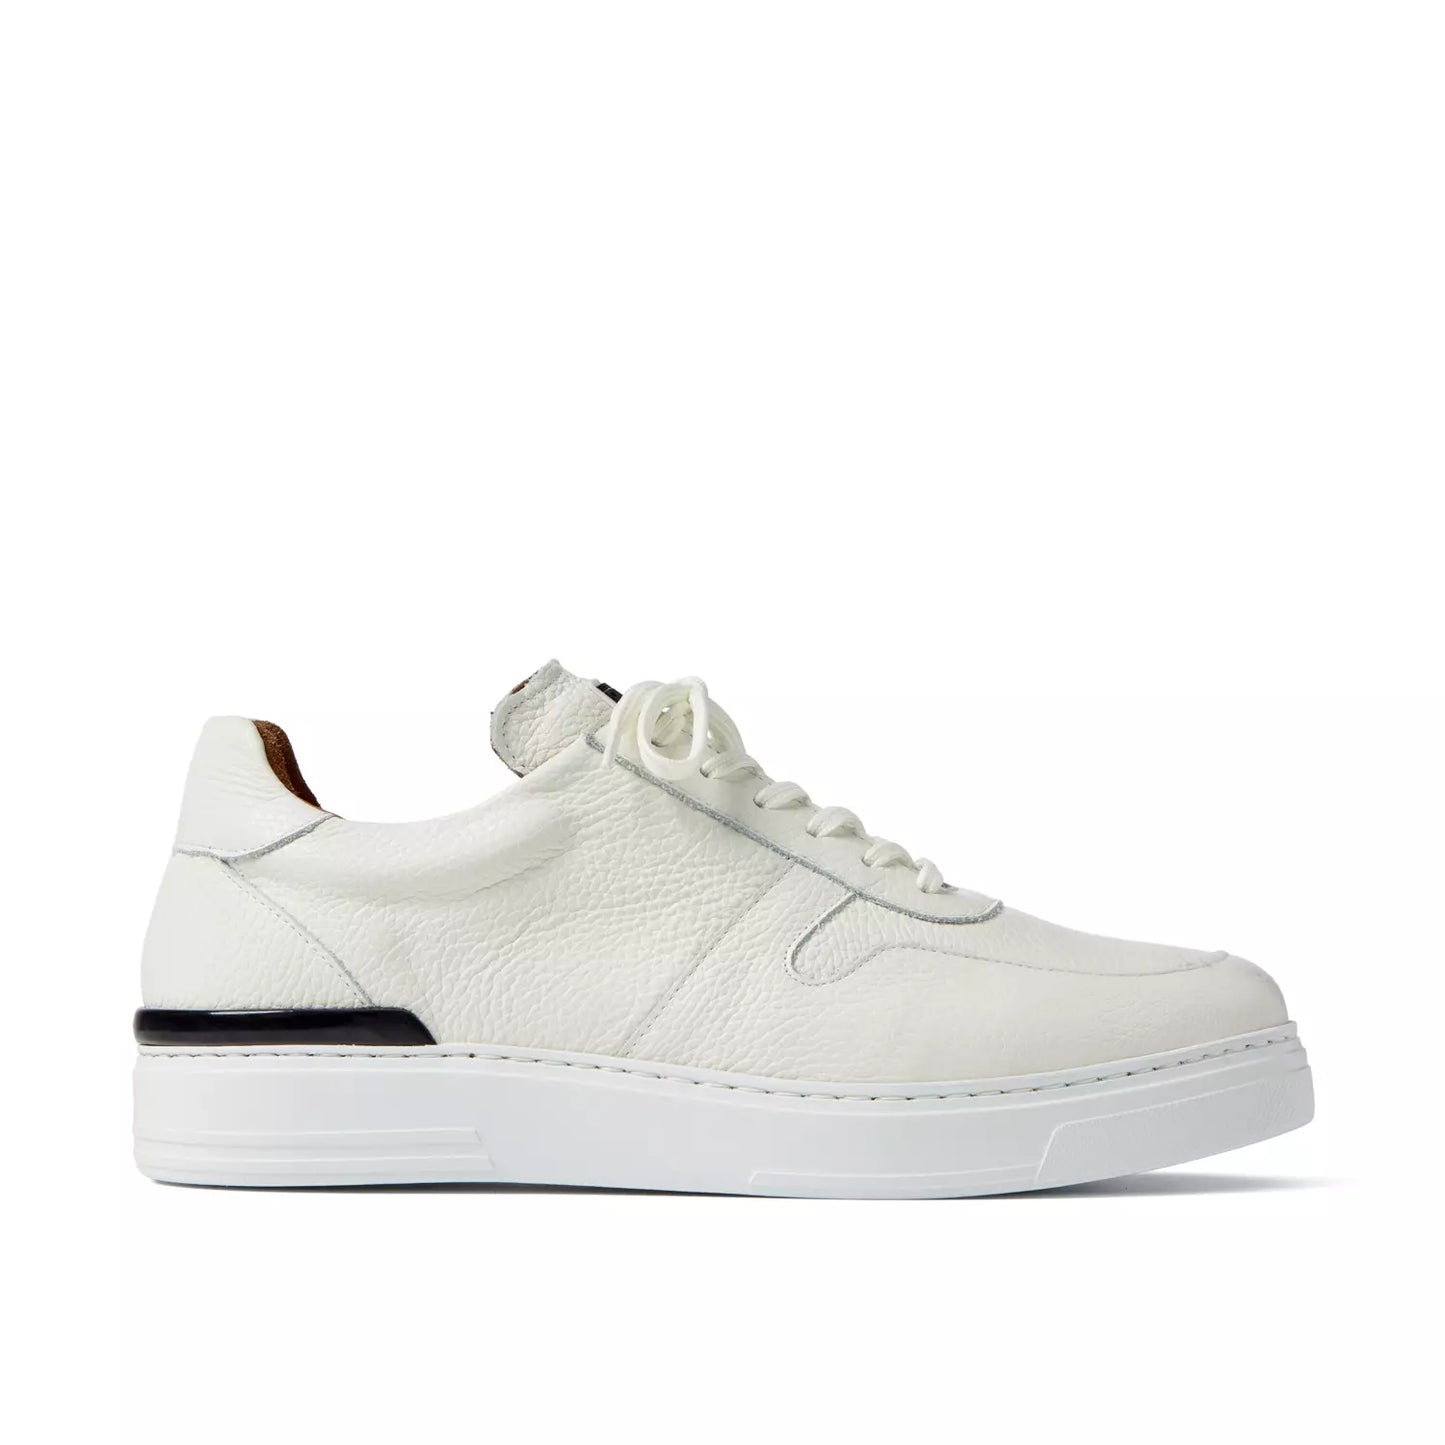 Duke and Dexter Ritchie White leather sneakers for men side view